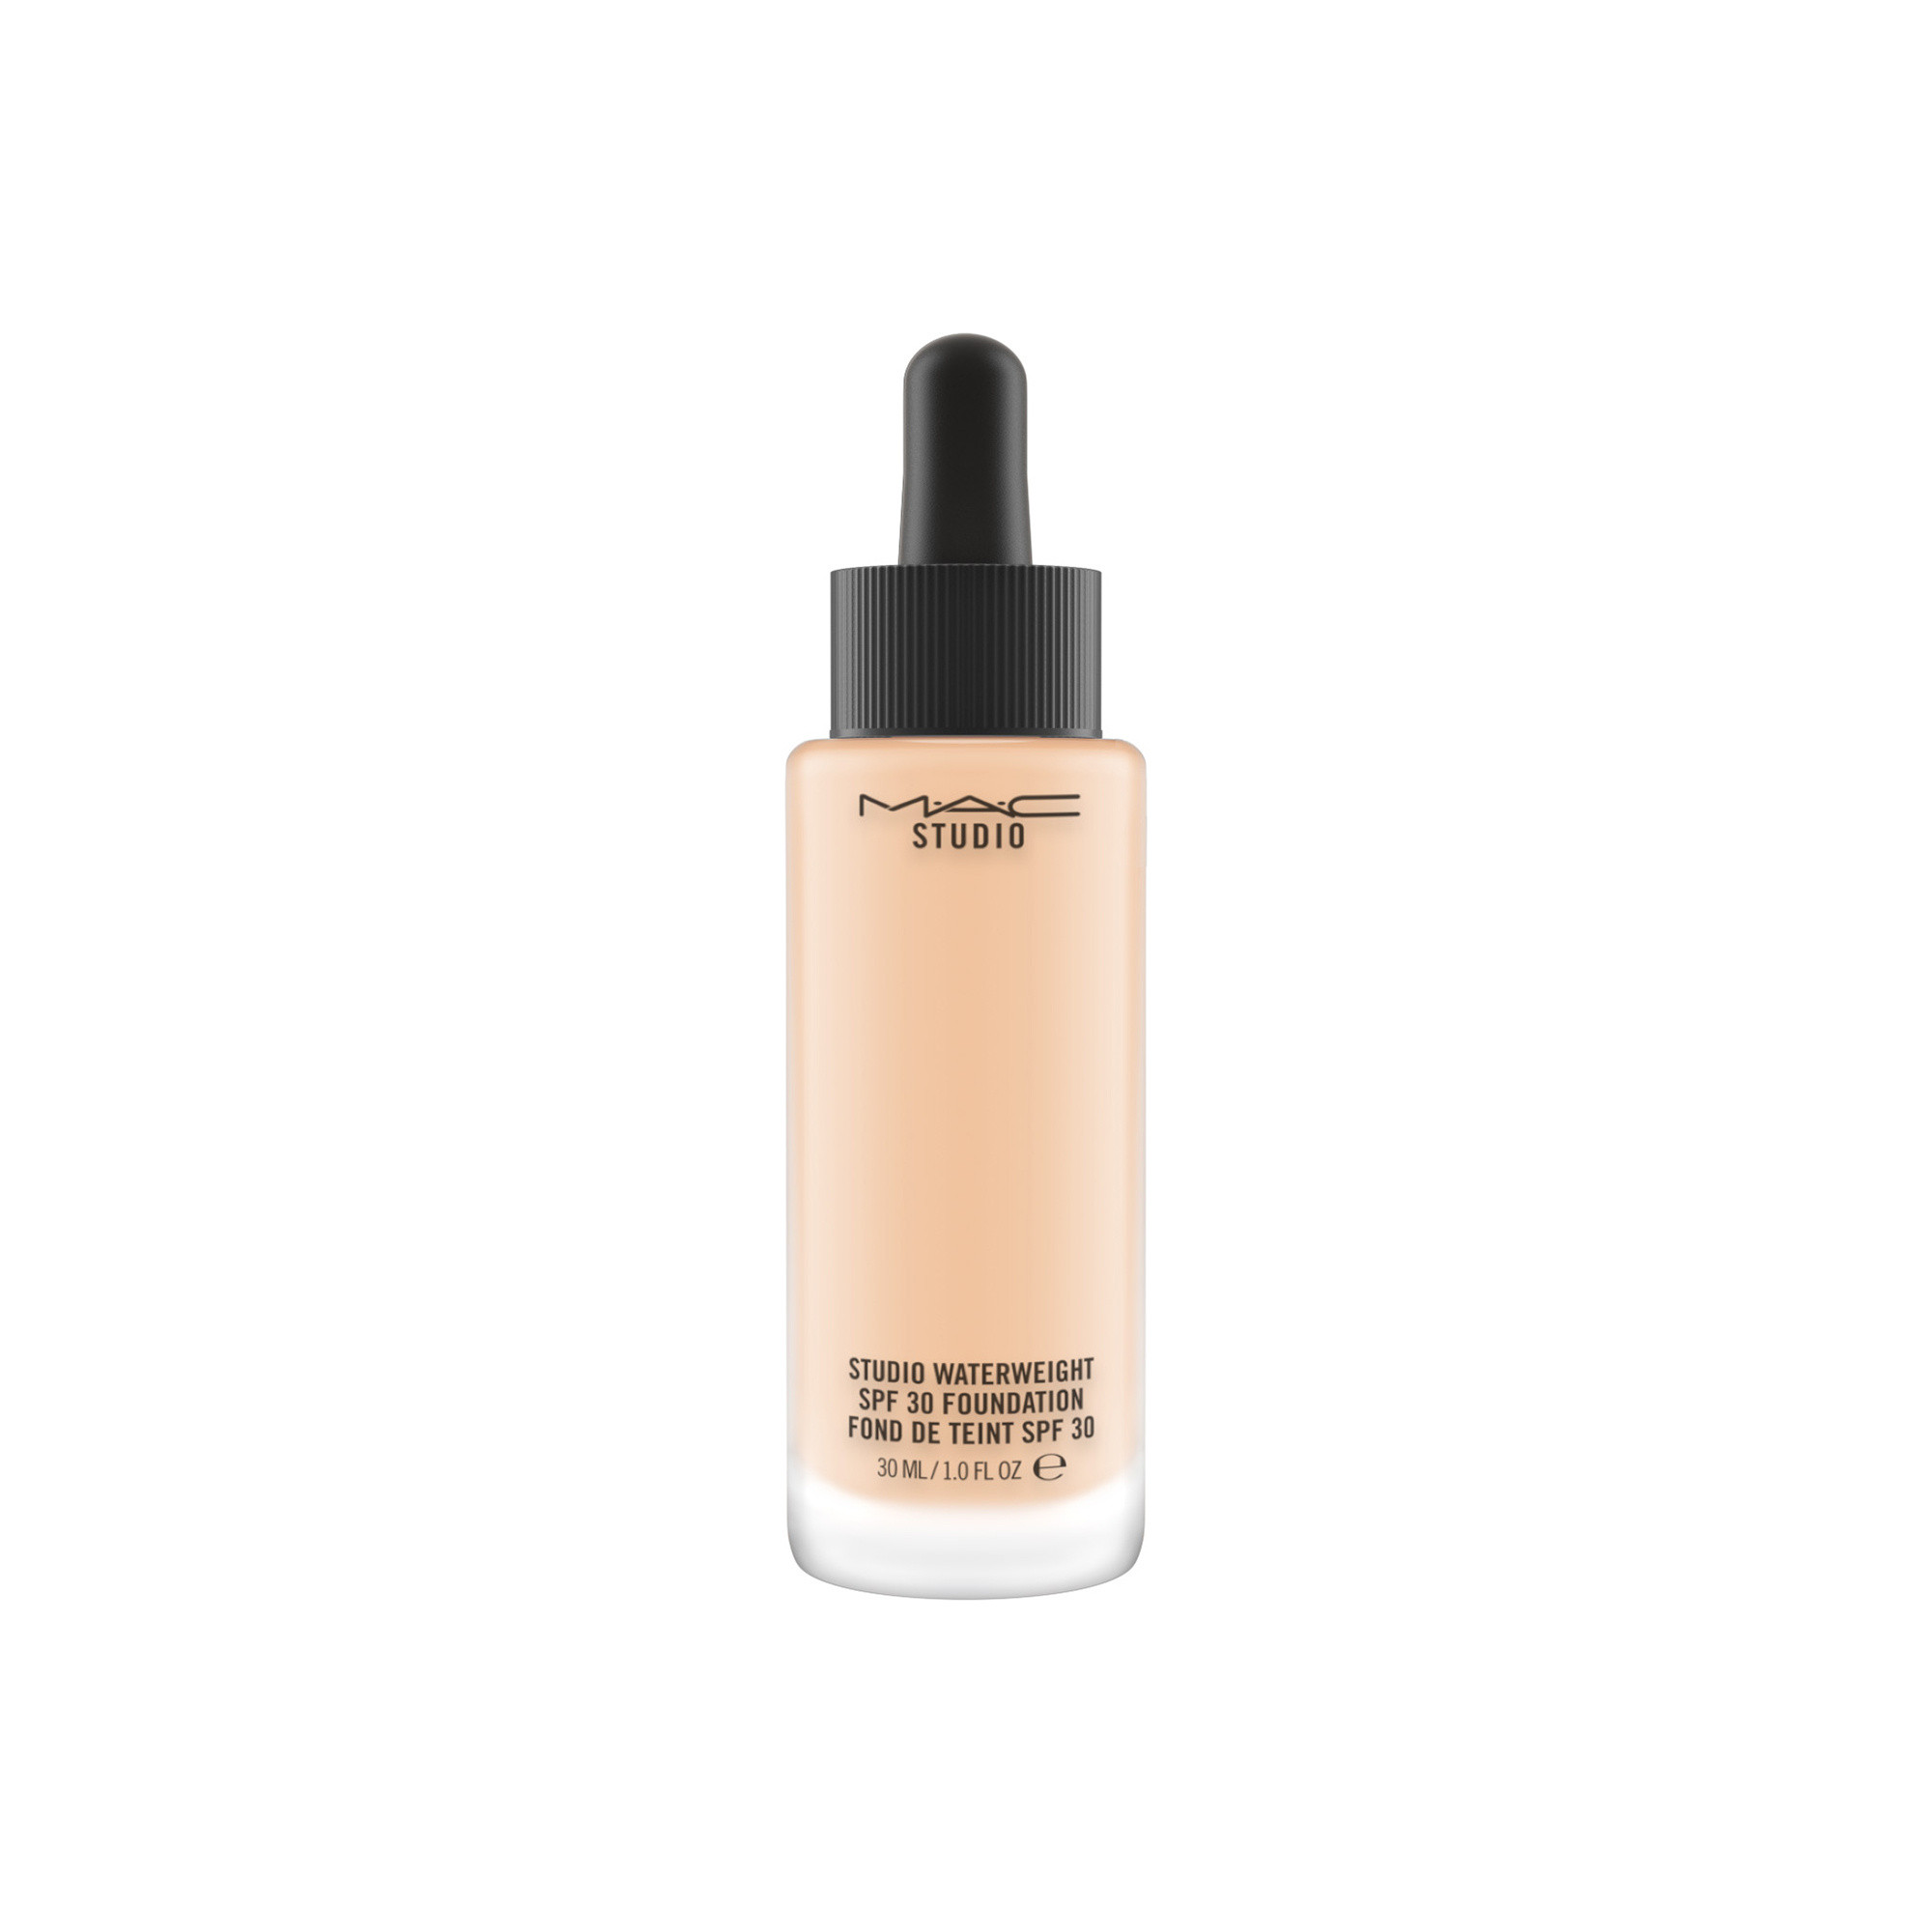 Studio Waterweight Foundation Spf30 - NC20, NC20, large image number 0